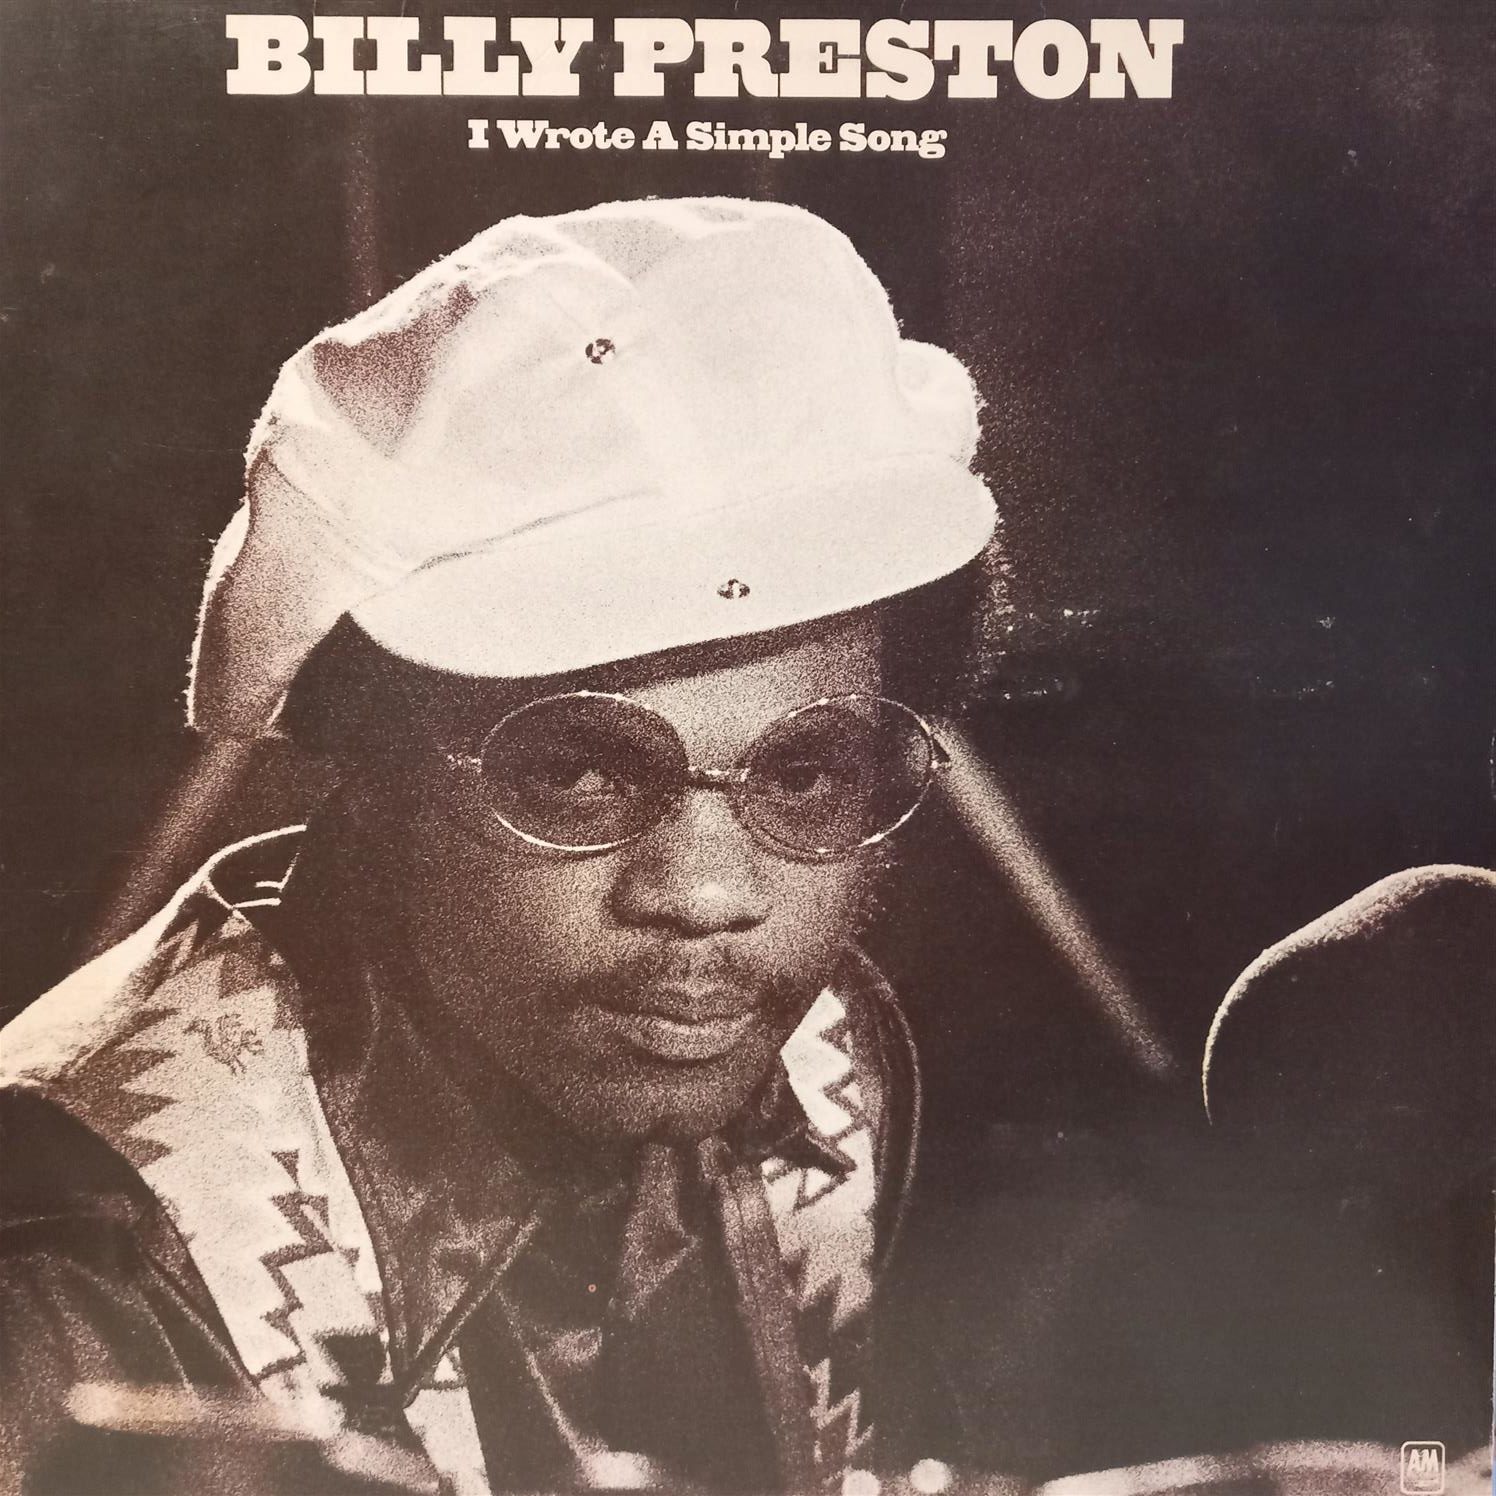 BILLY PRESTON – I WROTE A SIMPLE SONG ON